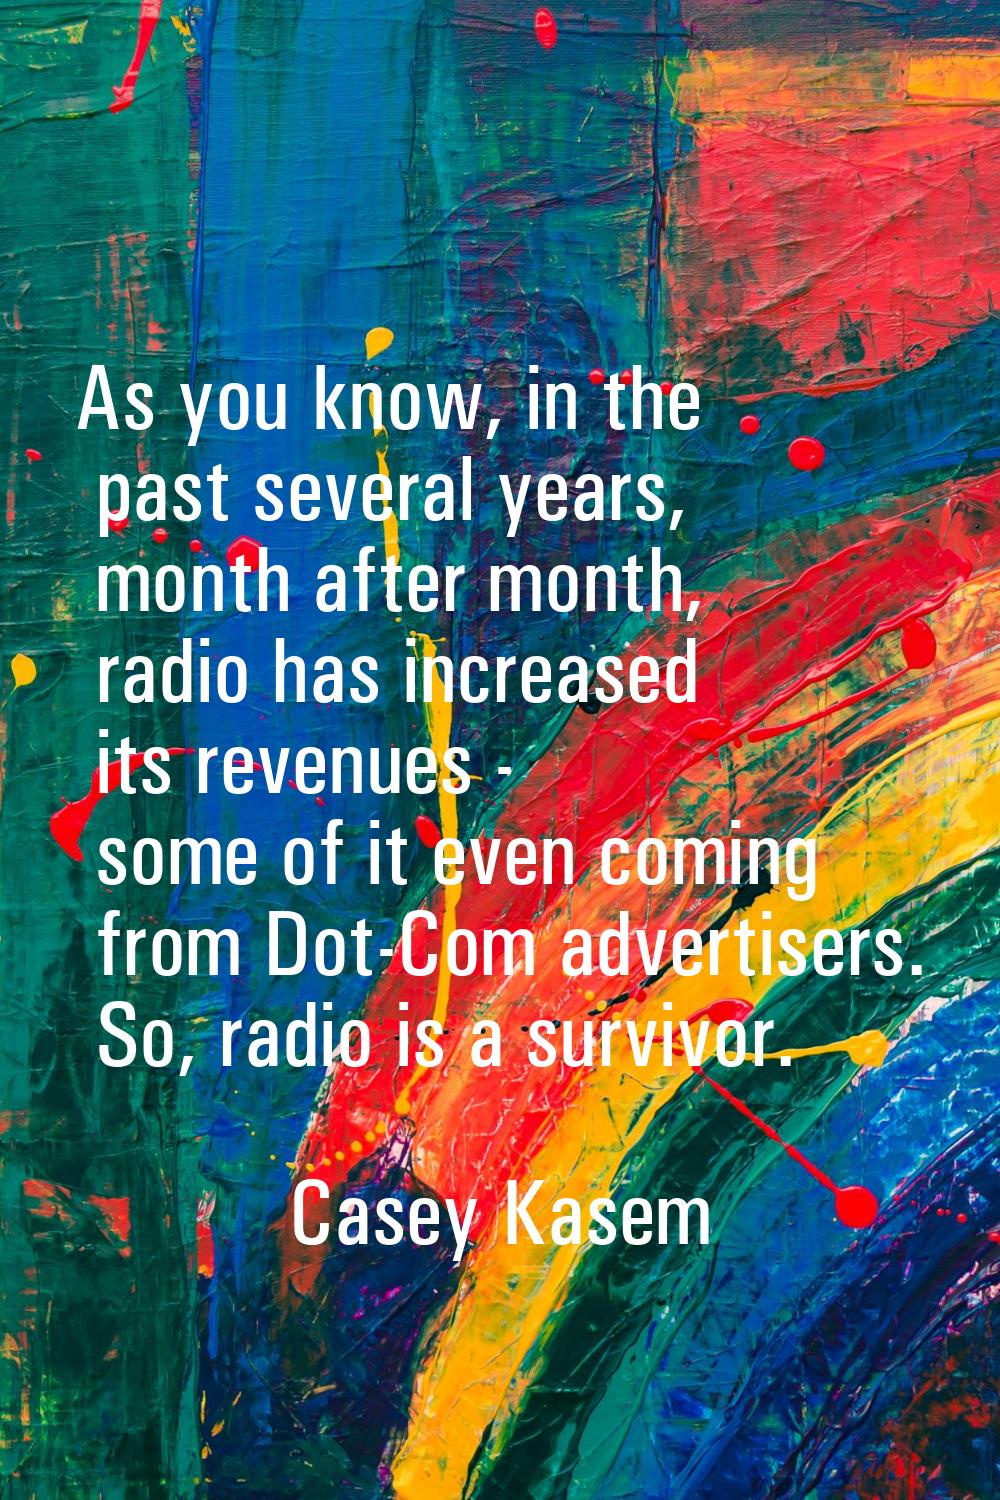 As you know, in the past several years, month after month, radio has increased its revenues - some 